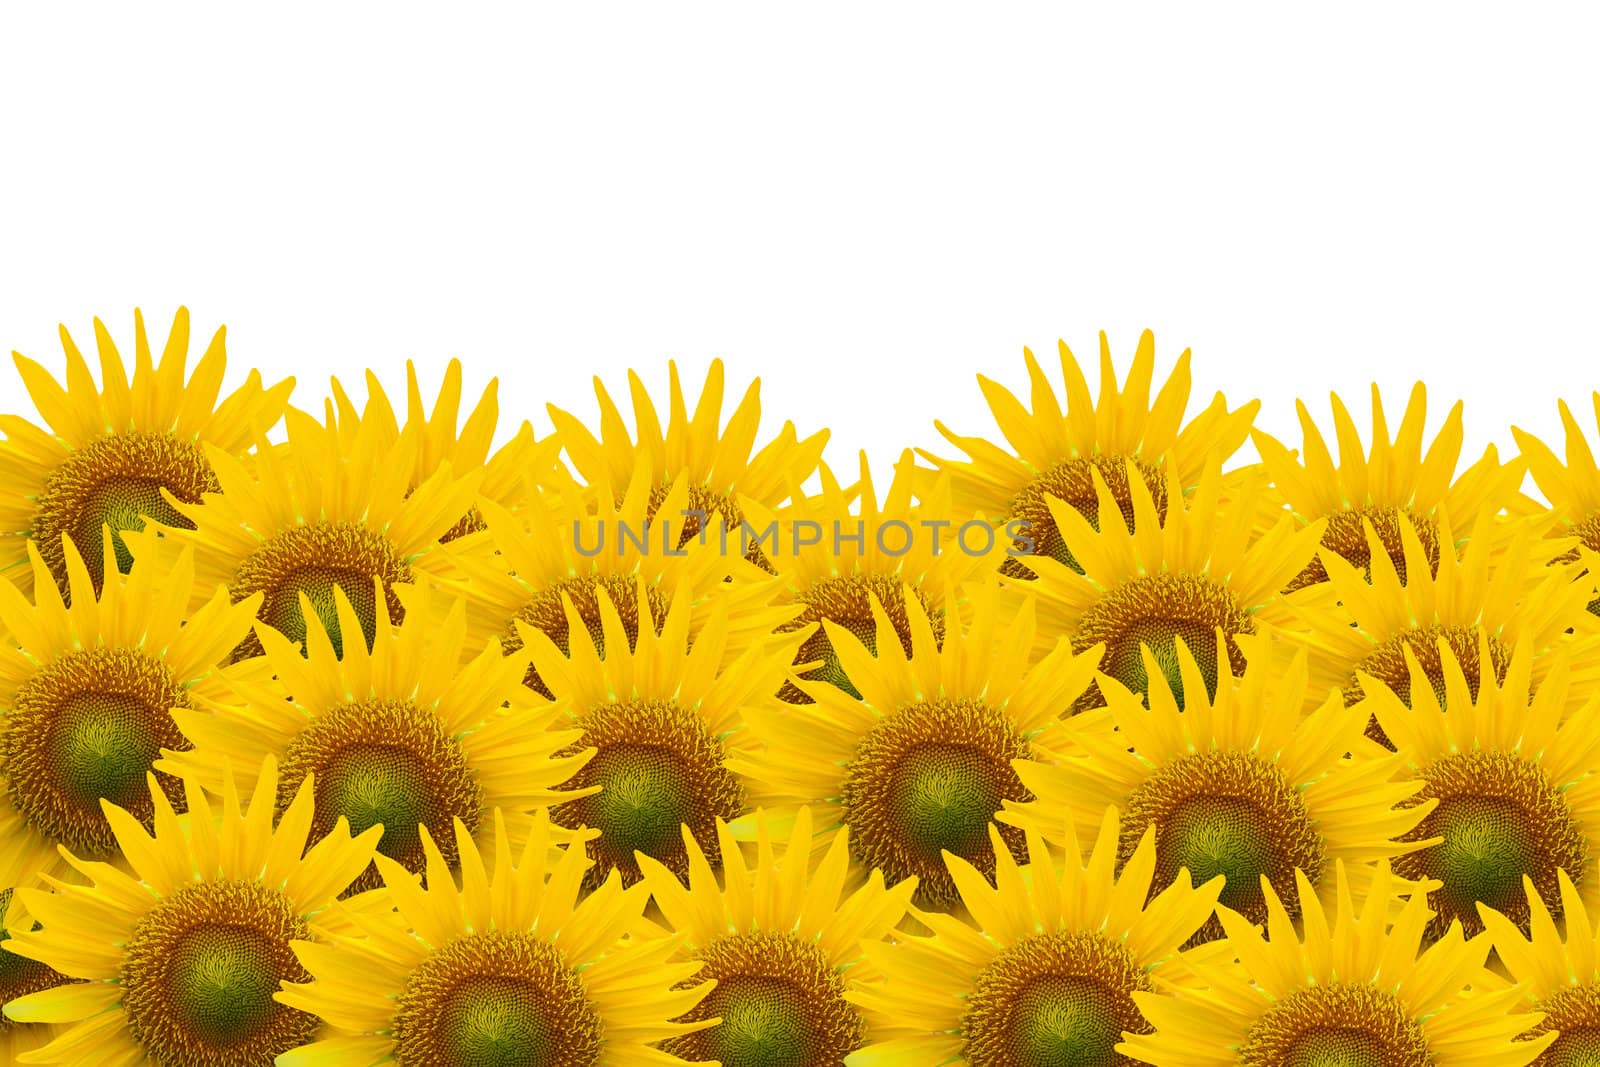 Many sunflower on white space background